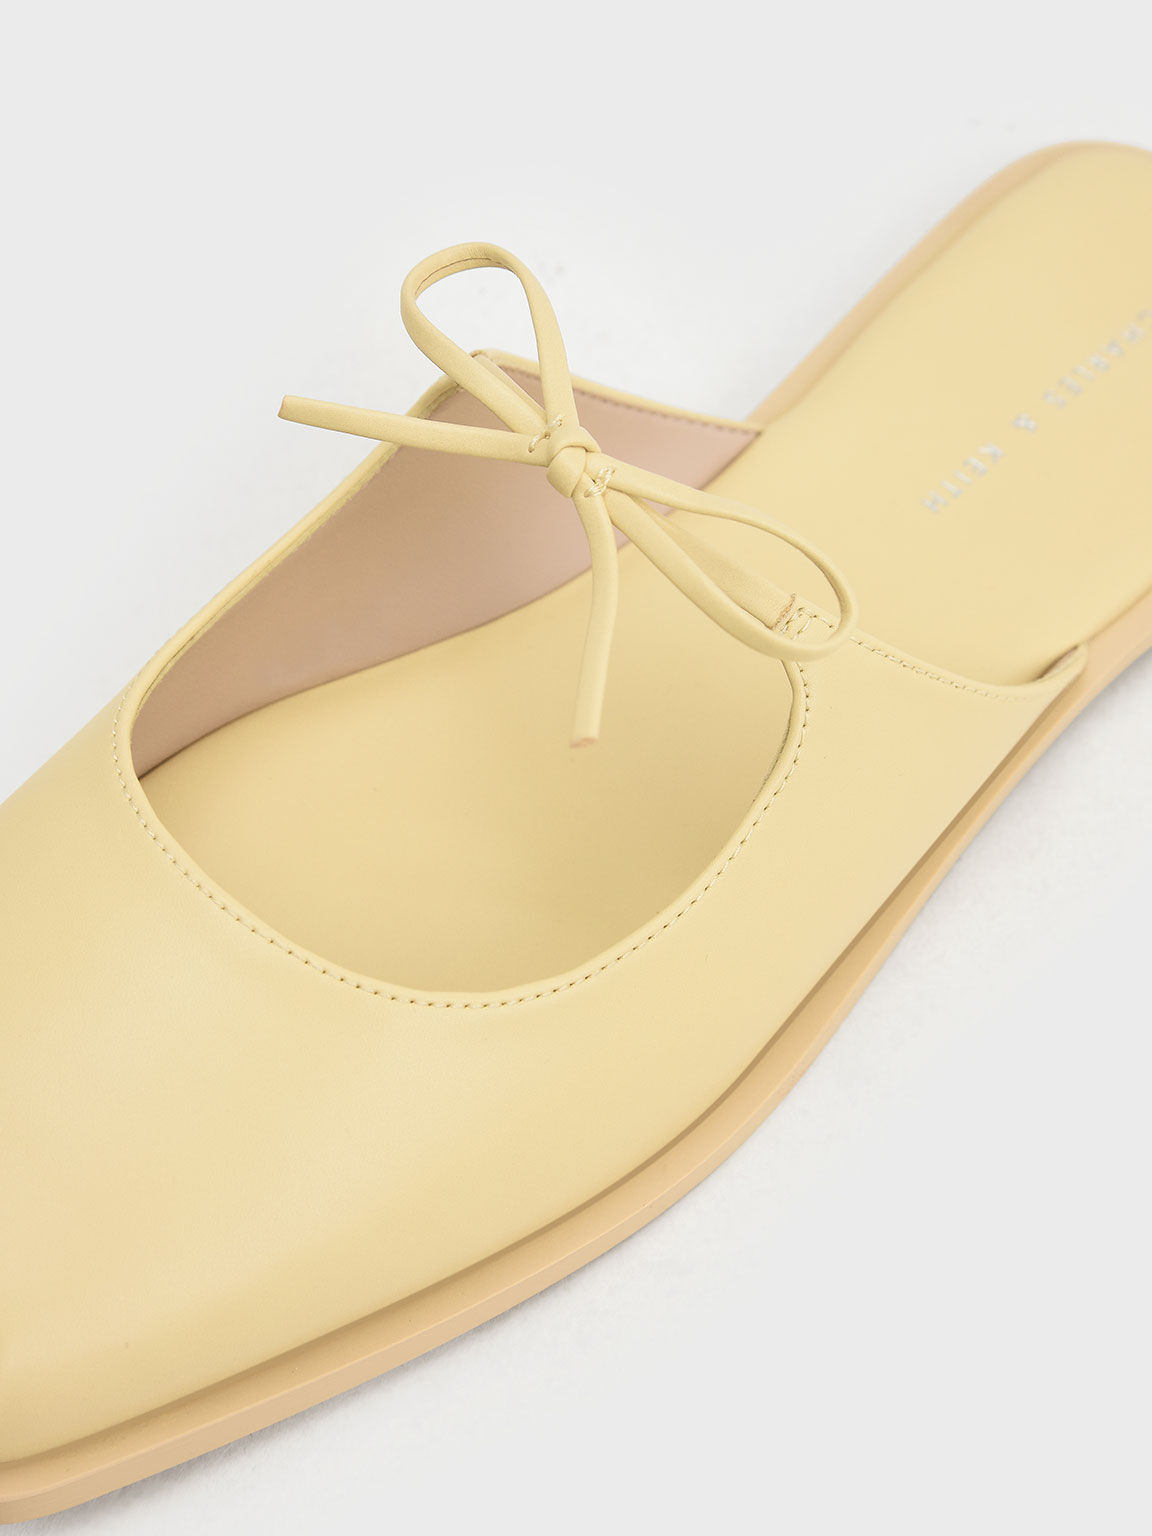 Dionne Bow-Tie Flat Mules, Yellow, hi-res